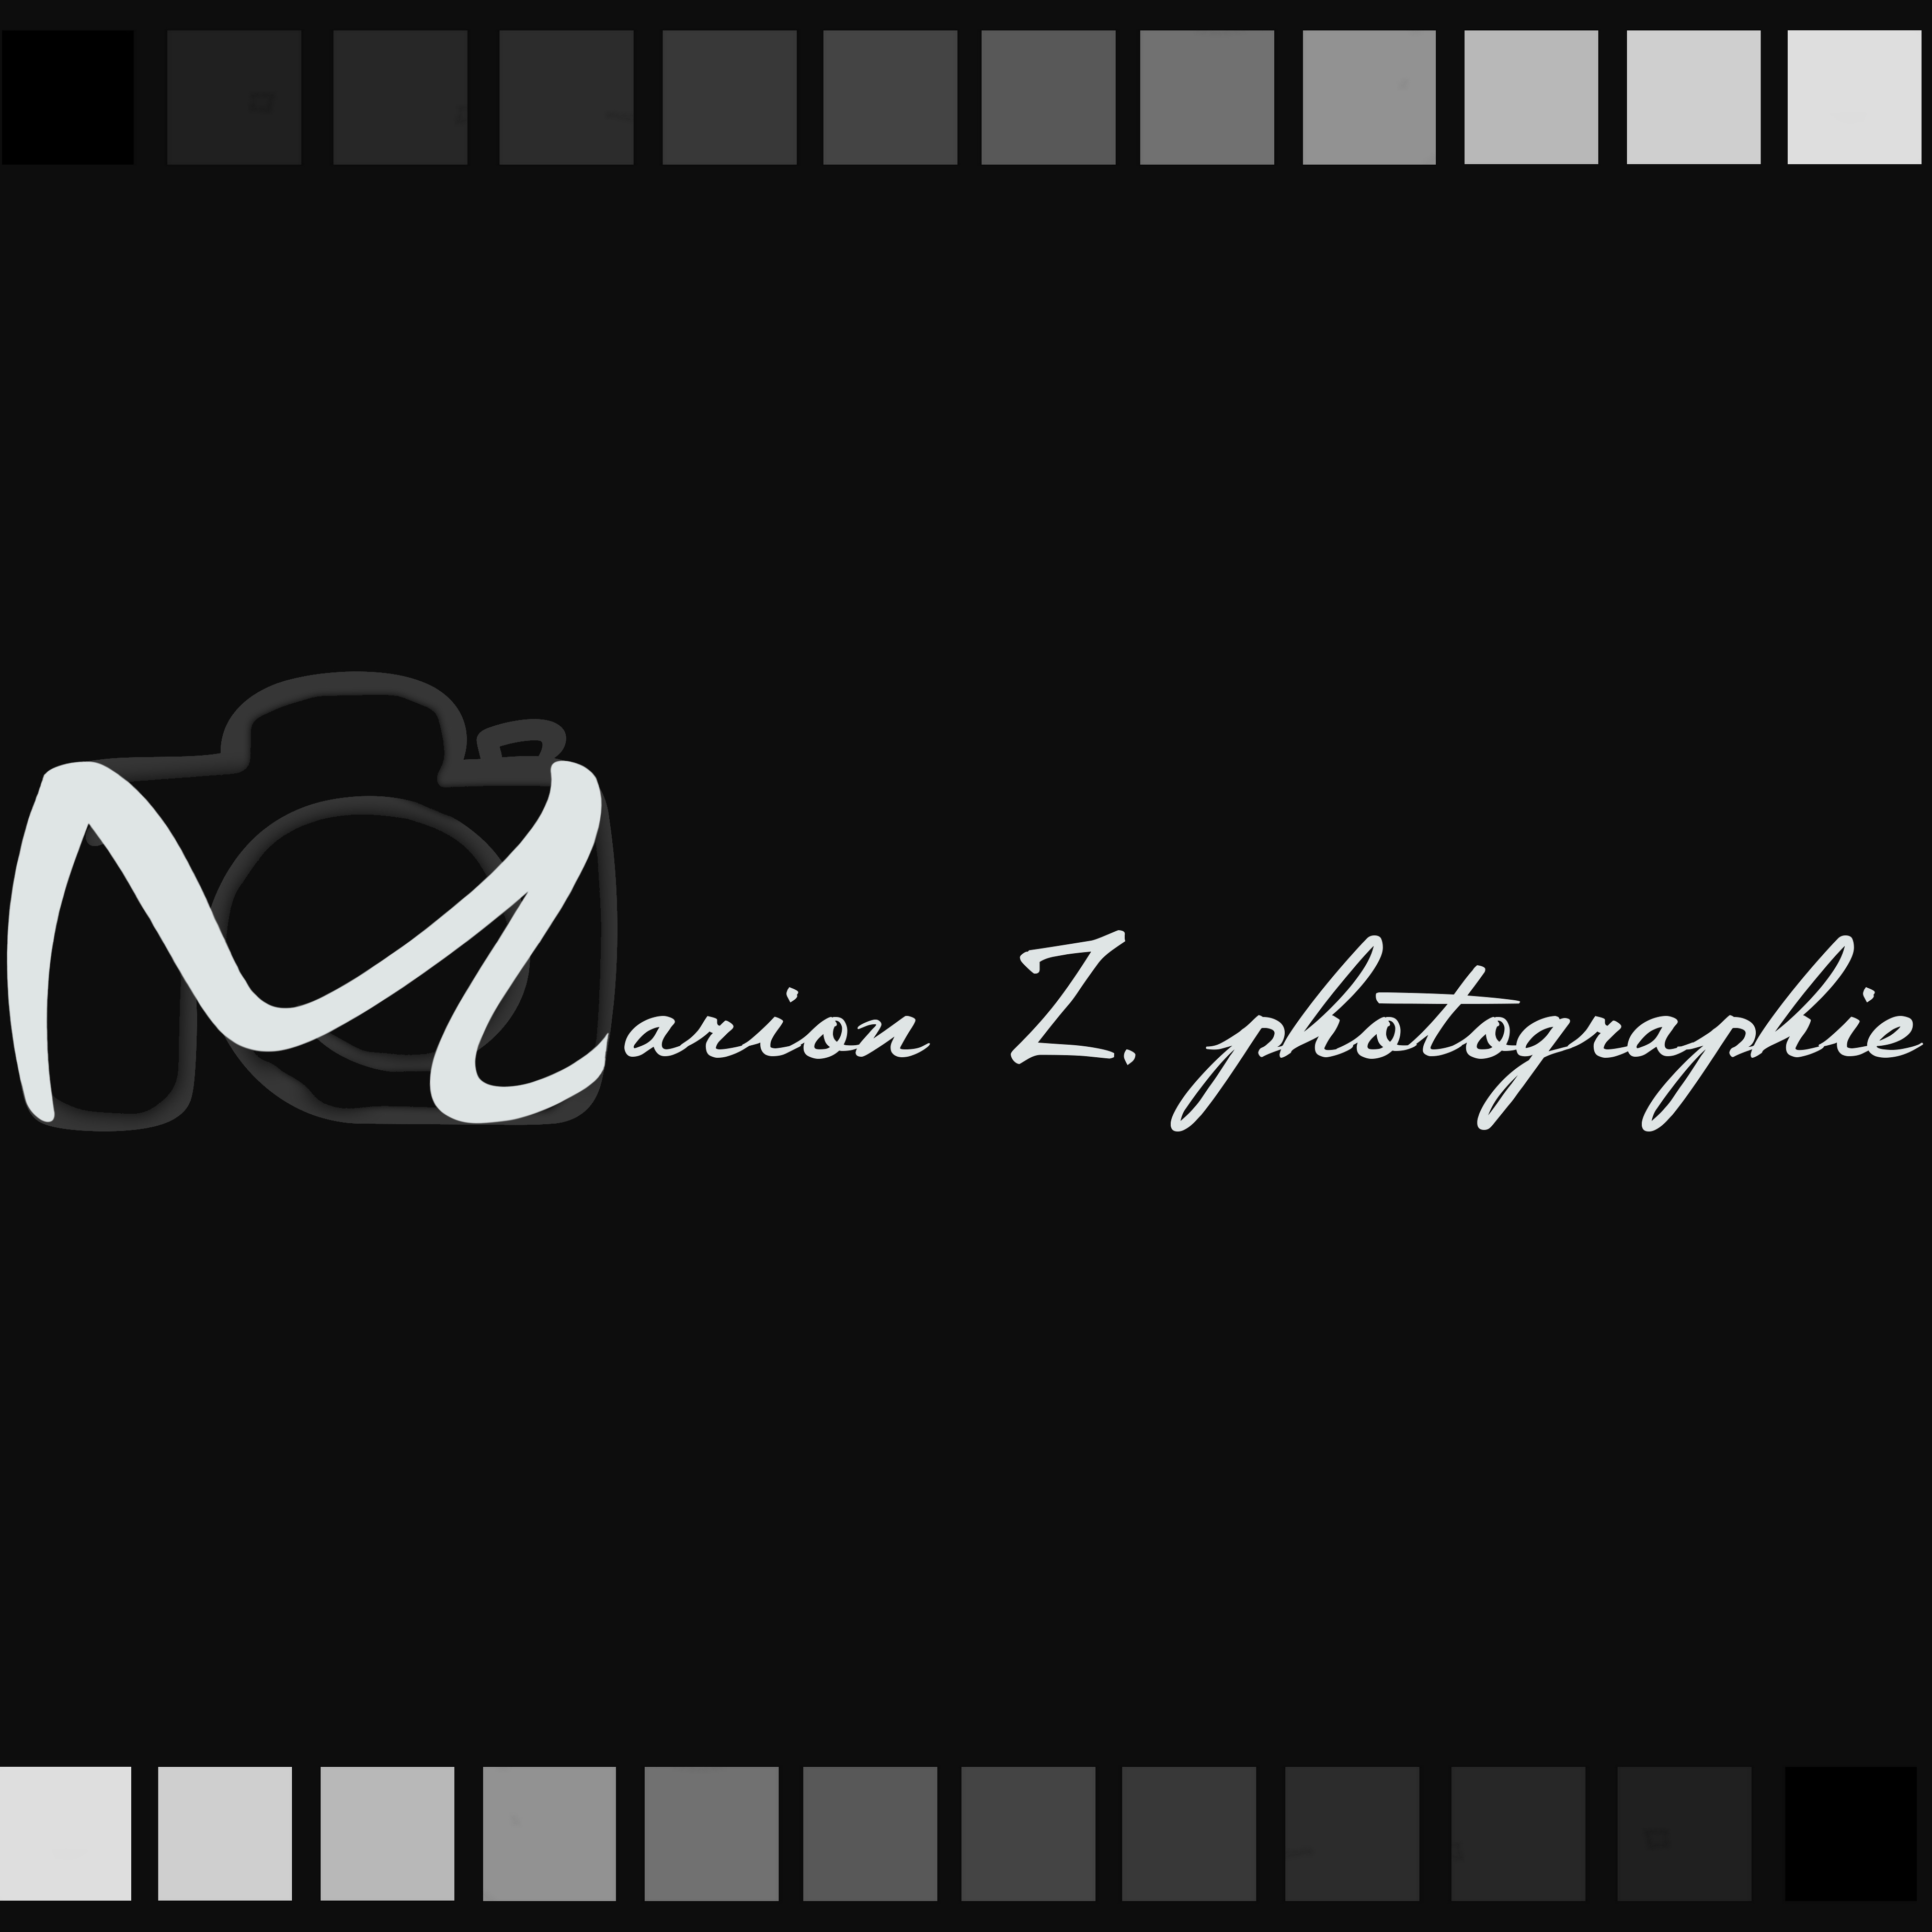 Marion Z. photographie